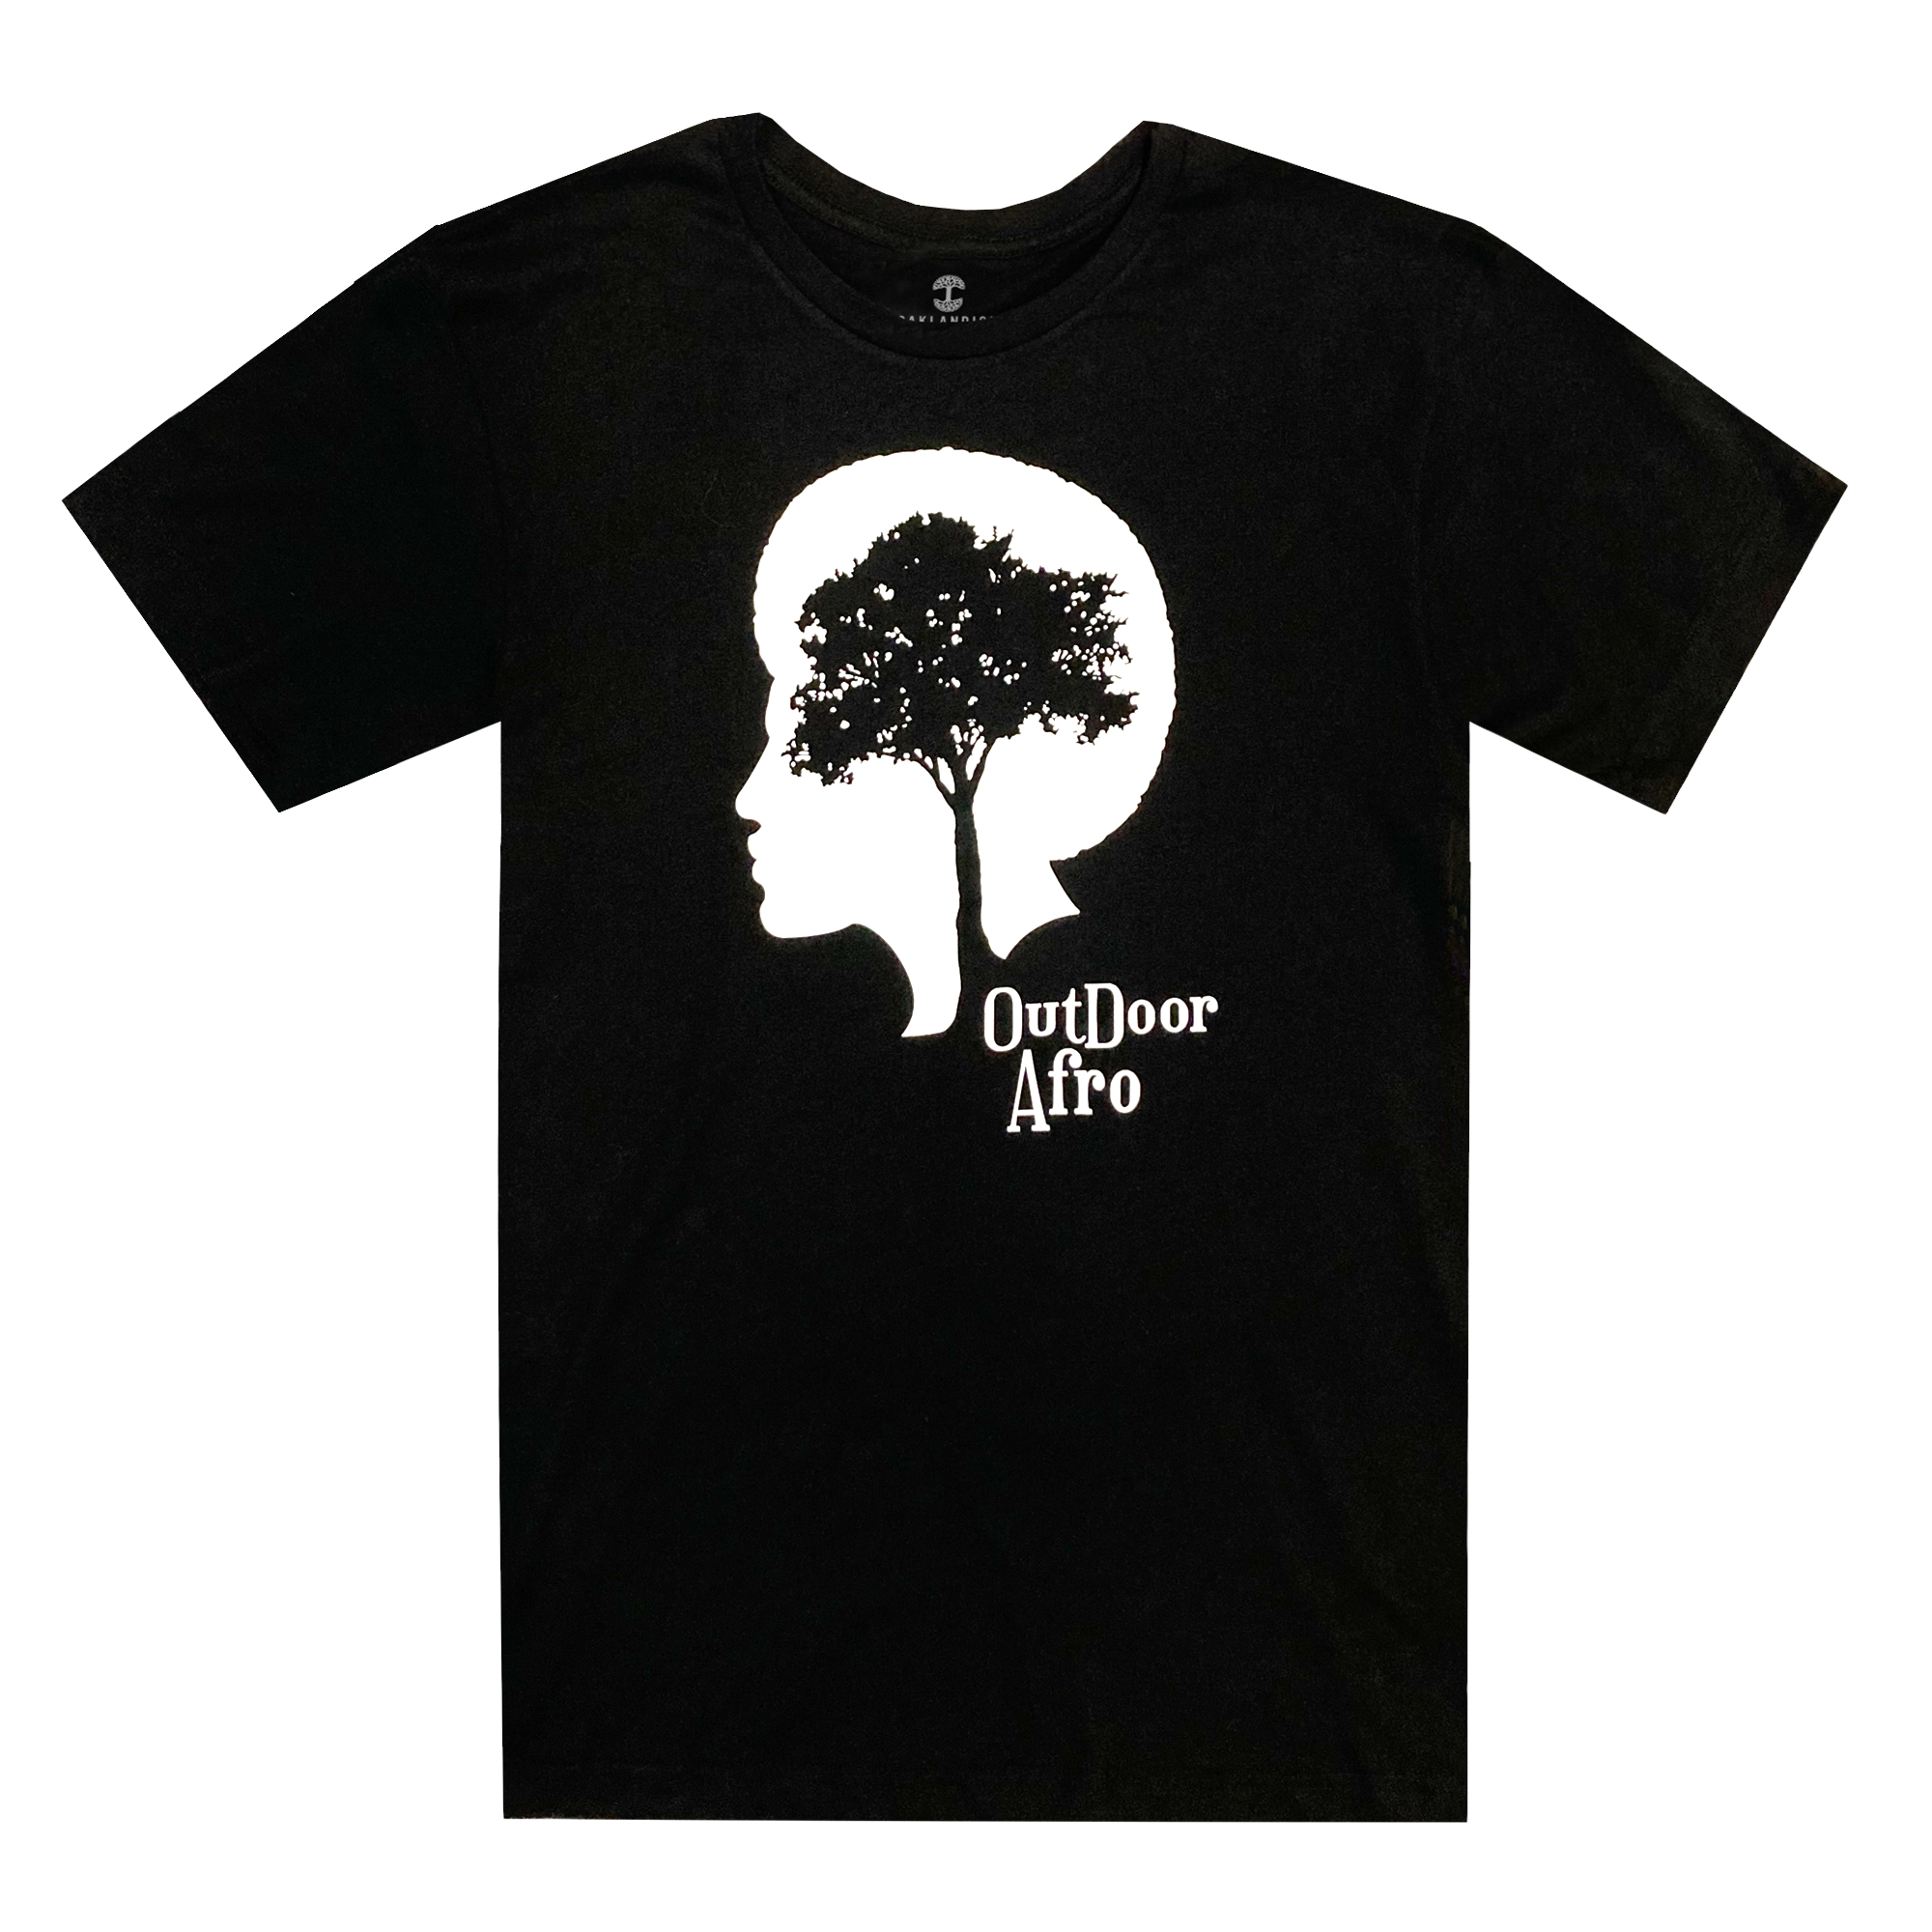 Front view of a black t-shirt with white OutDoor Afro logo and wordmark.